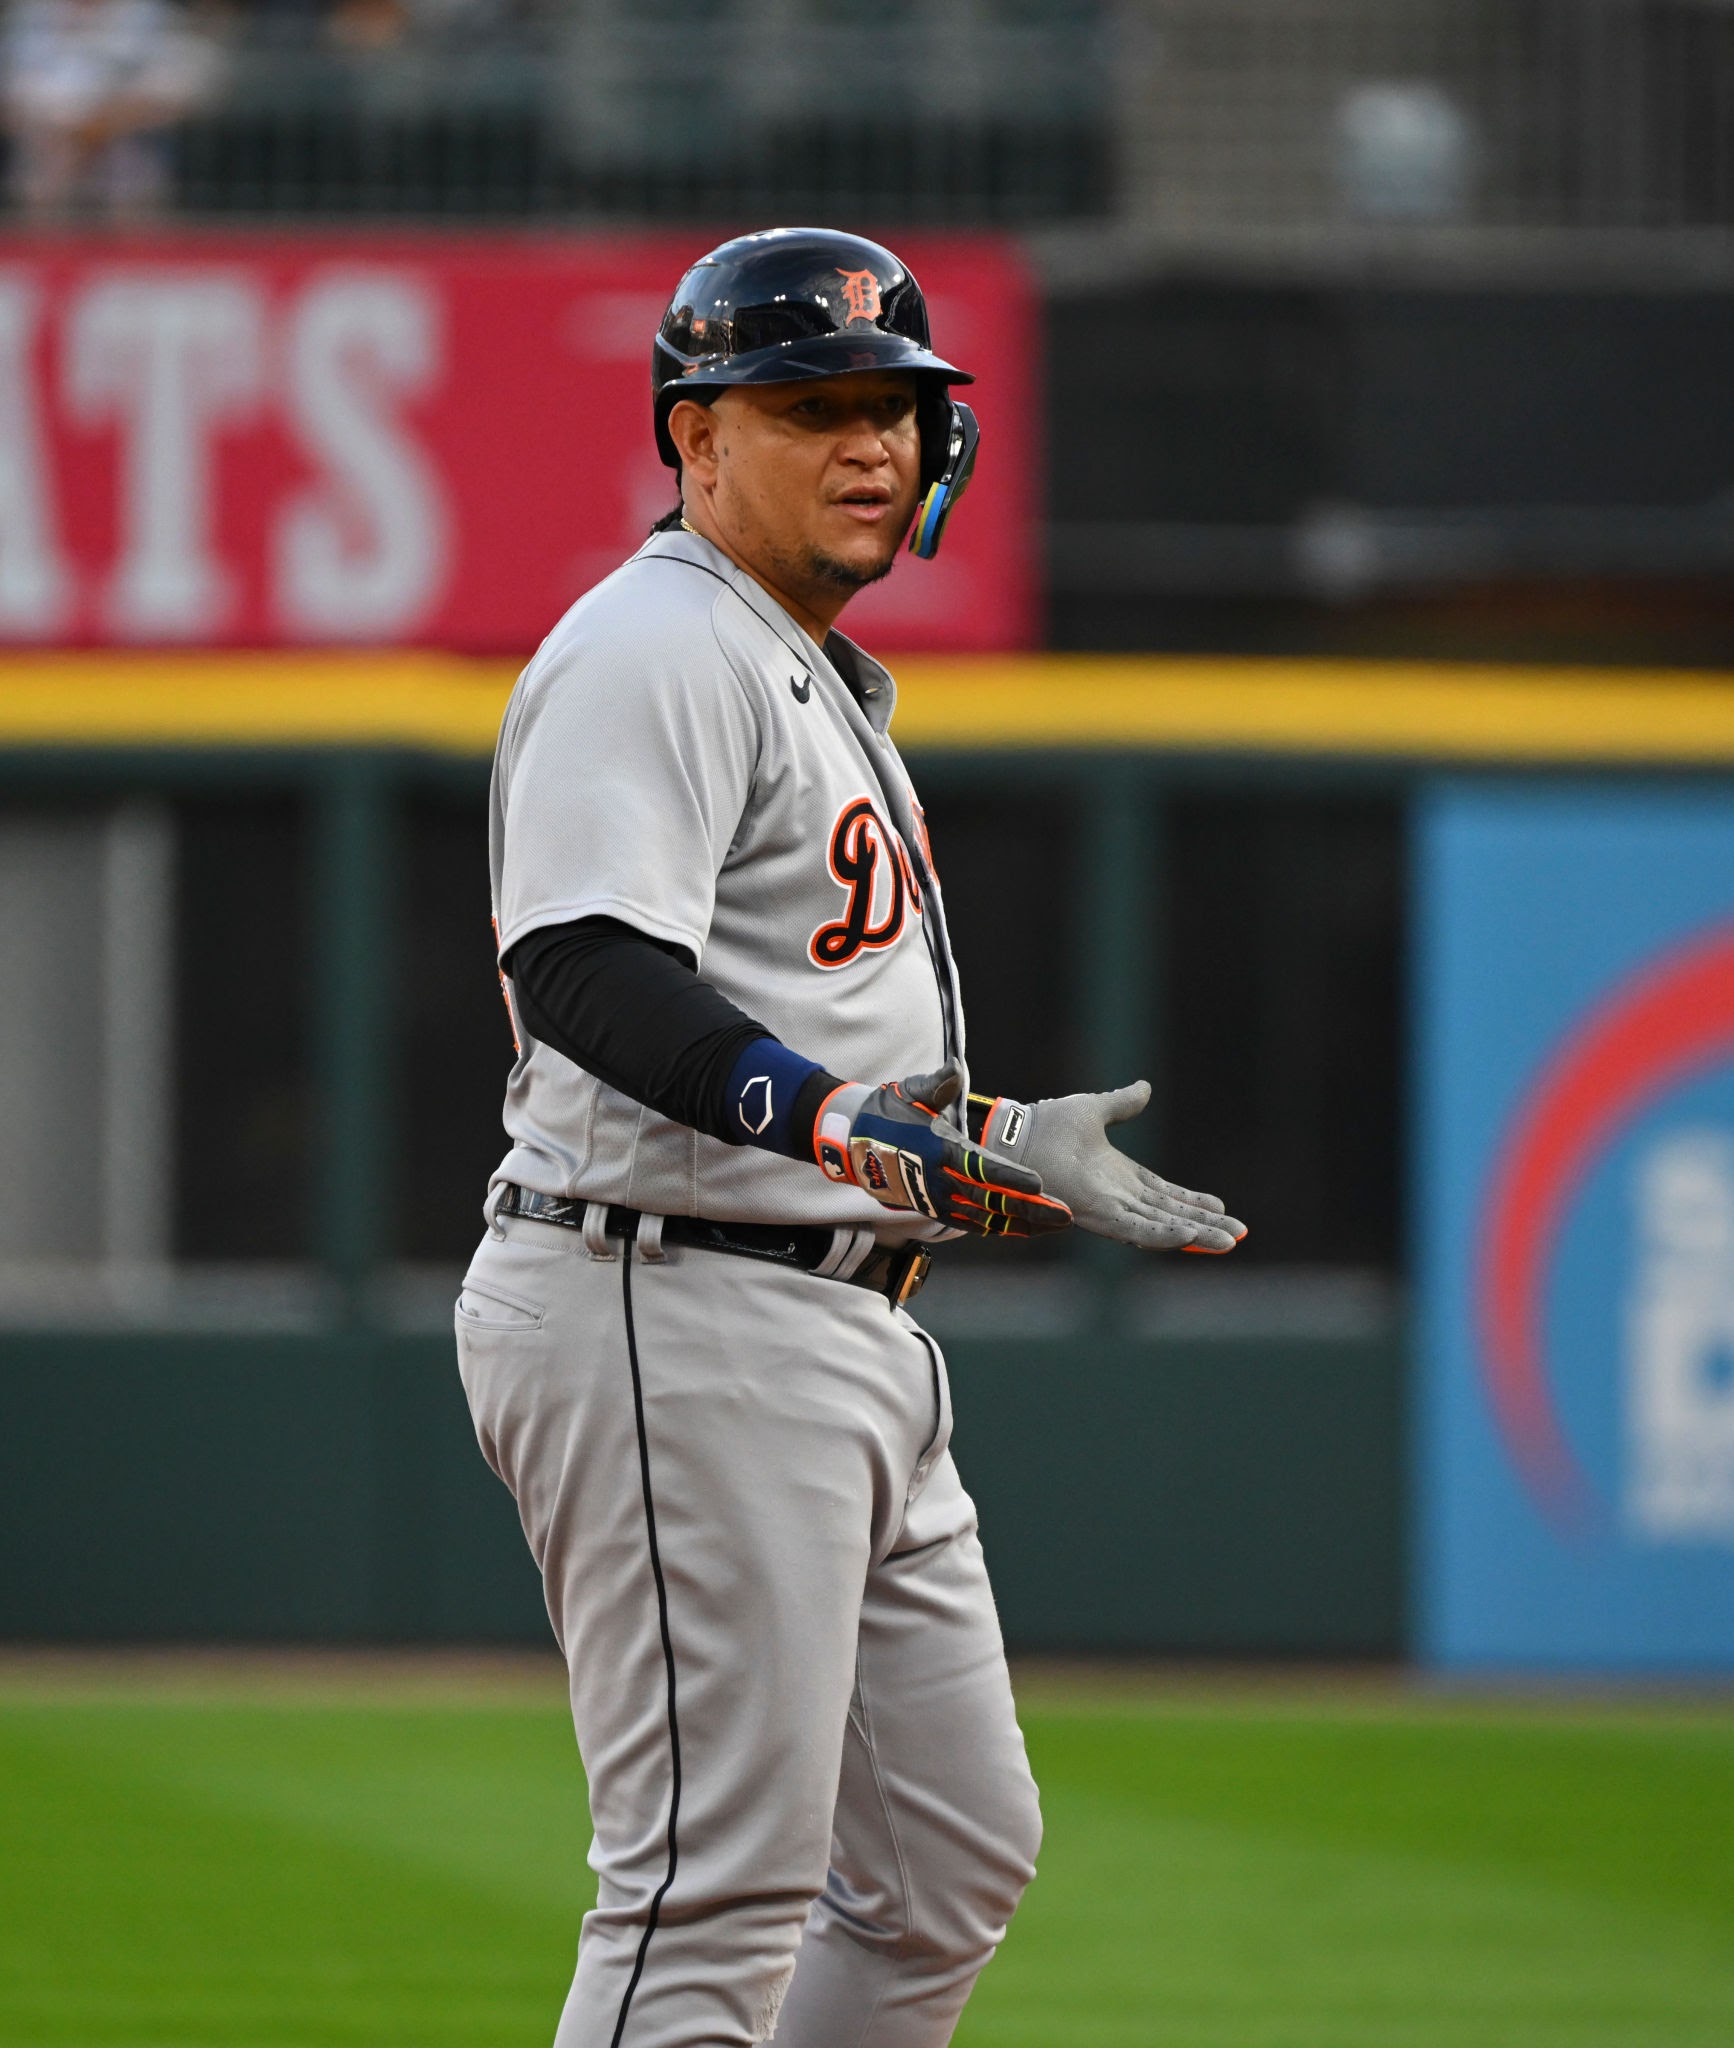 Baseball-Reference.com - Miguel Cabrera hit 2 HRs yesterday. Per